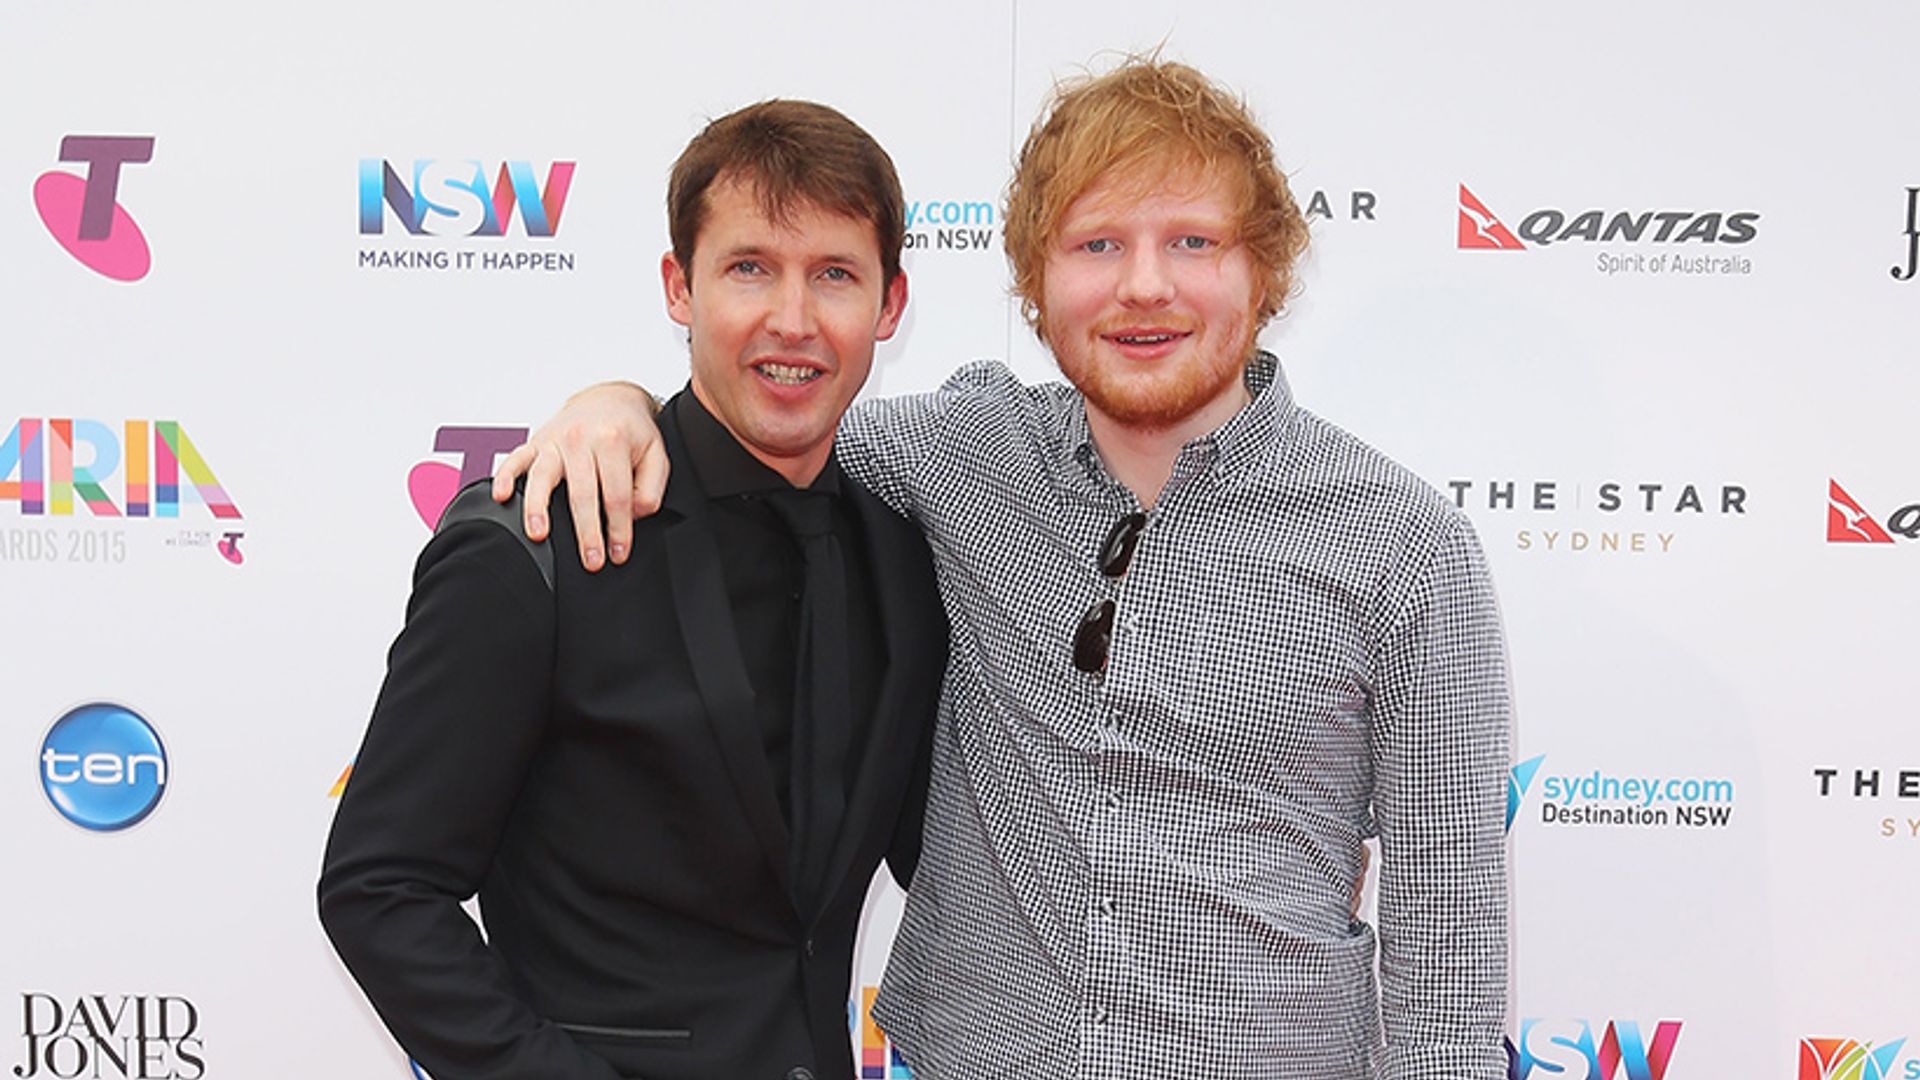 James Blunt says story about Princess Beatrice cutting Ed Sheeran's face was all made up